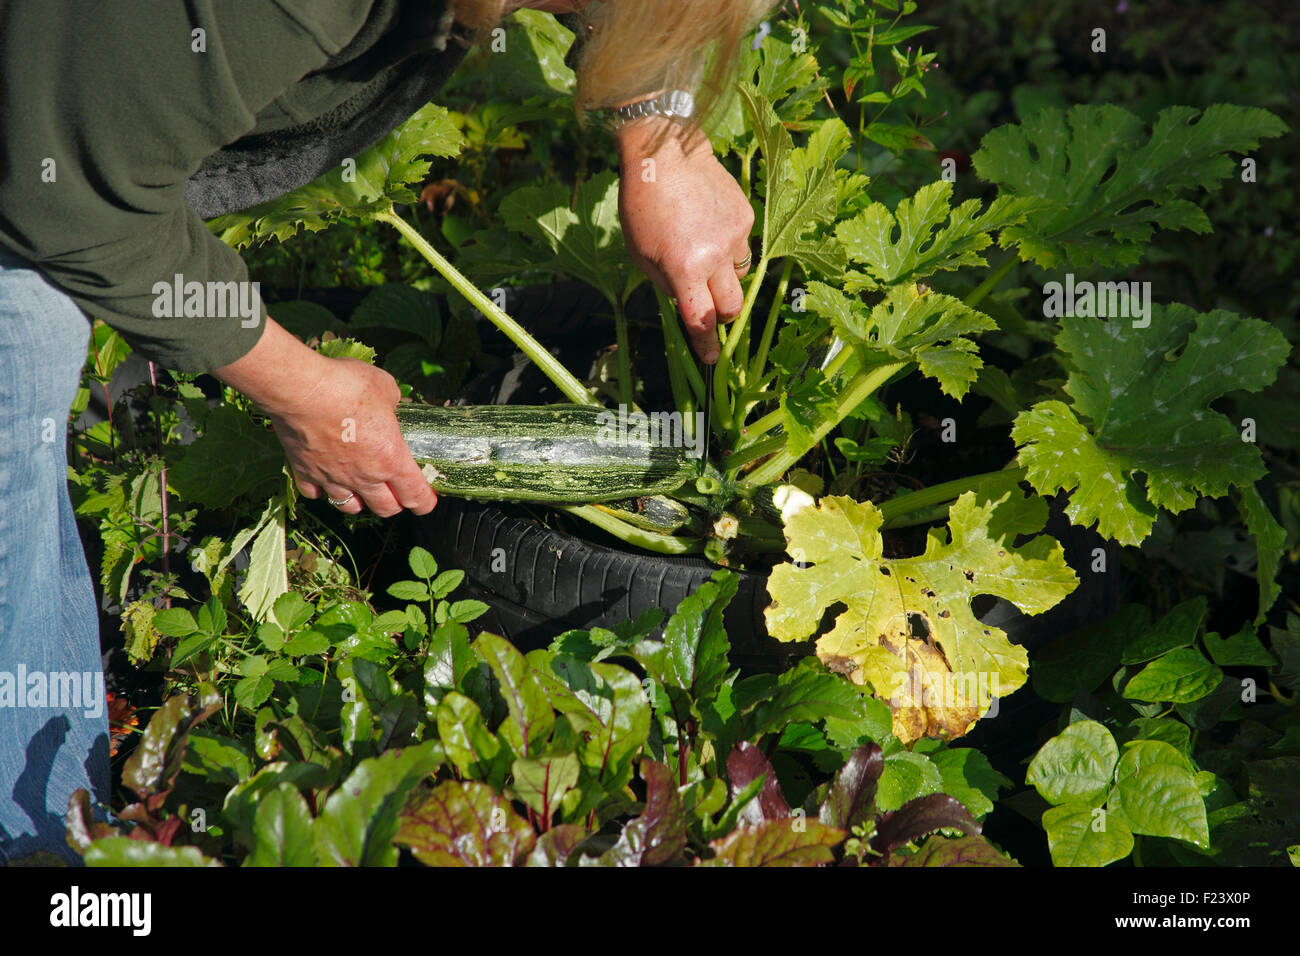 Cutting a Marrow growing in a tyre Stock Photo